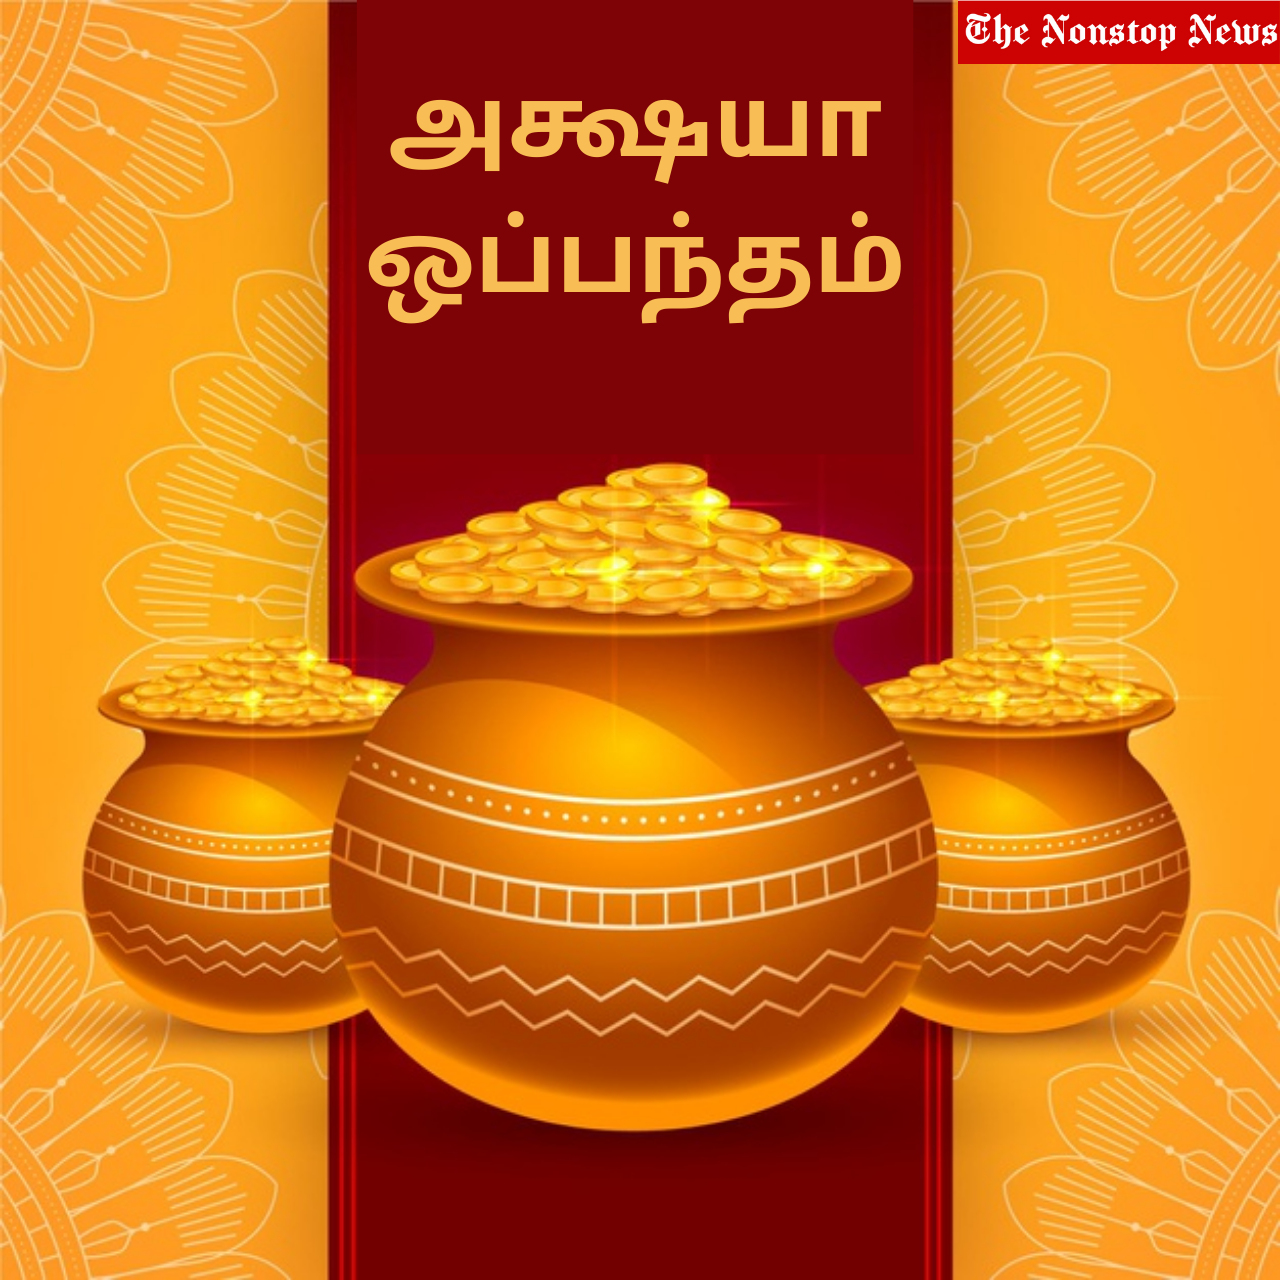 Akshaya Tritiya 2021 wishes in Tamil, Quotes, Images, messages, and greetings to share